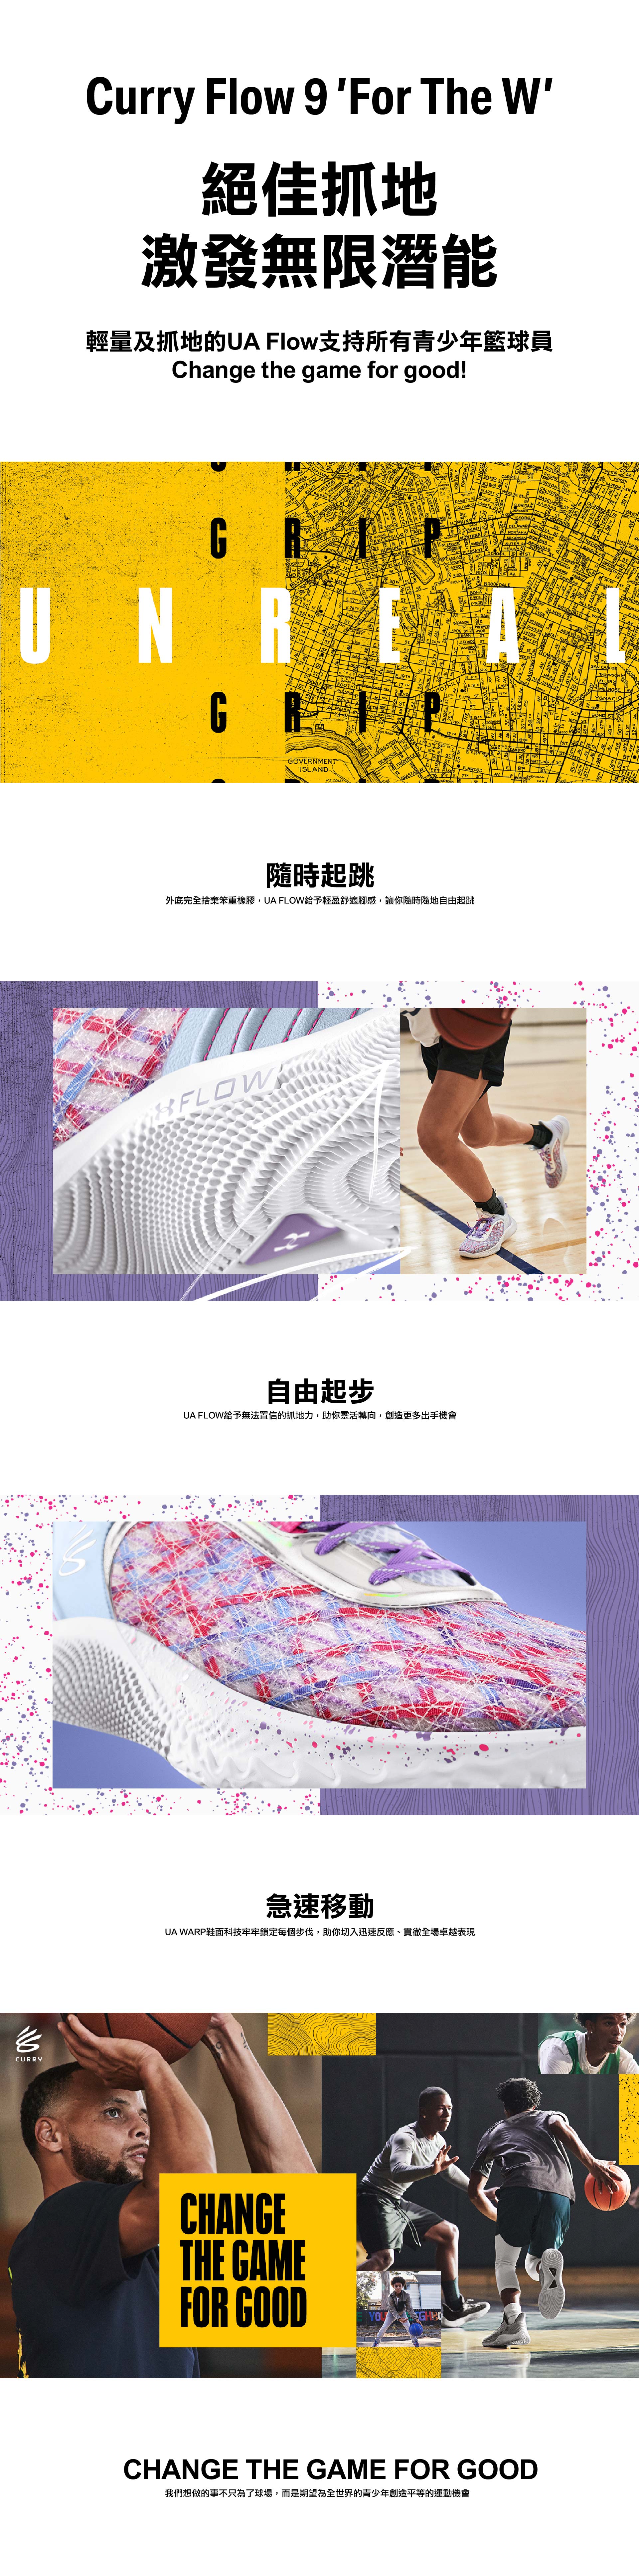 Under Armour CURRY 9籃球鞋/For the W